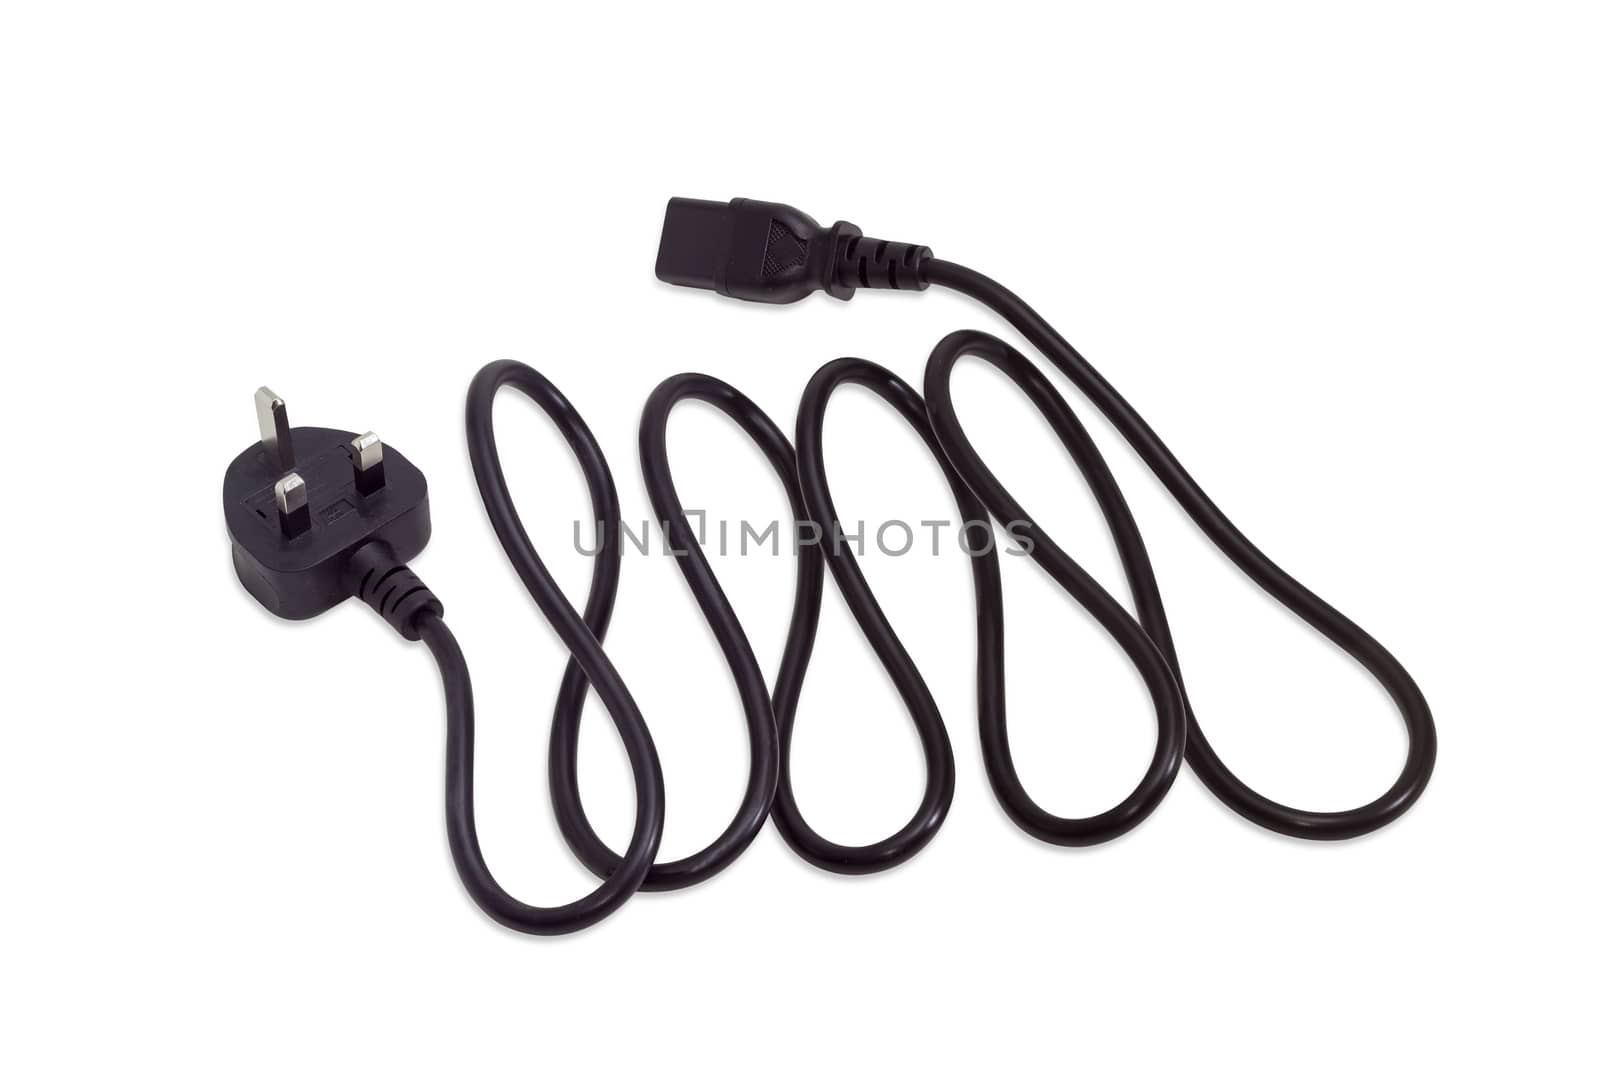 Power cable with BS 1363 plug on a light background by anmbph